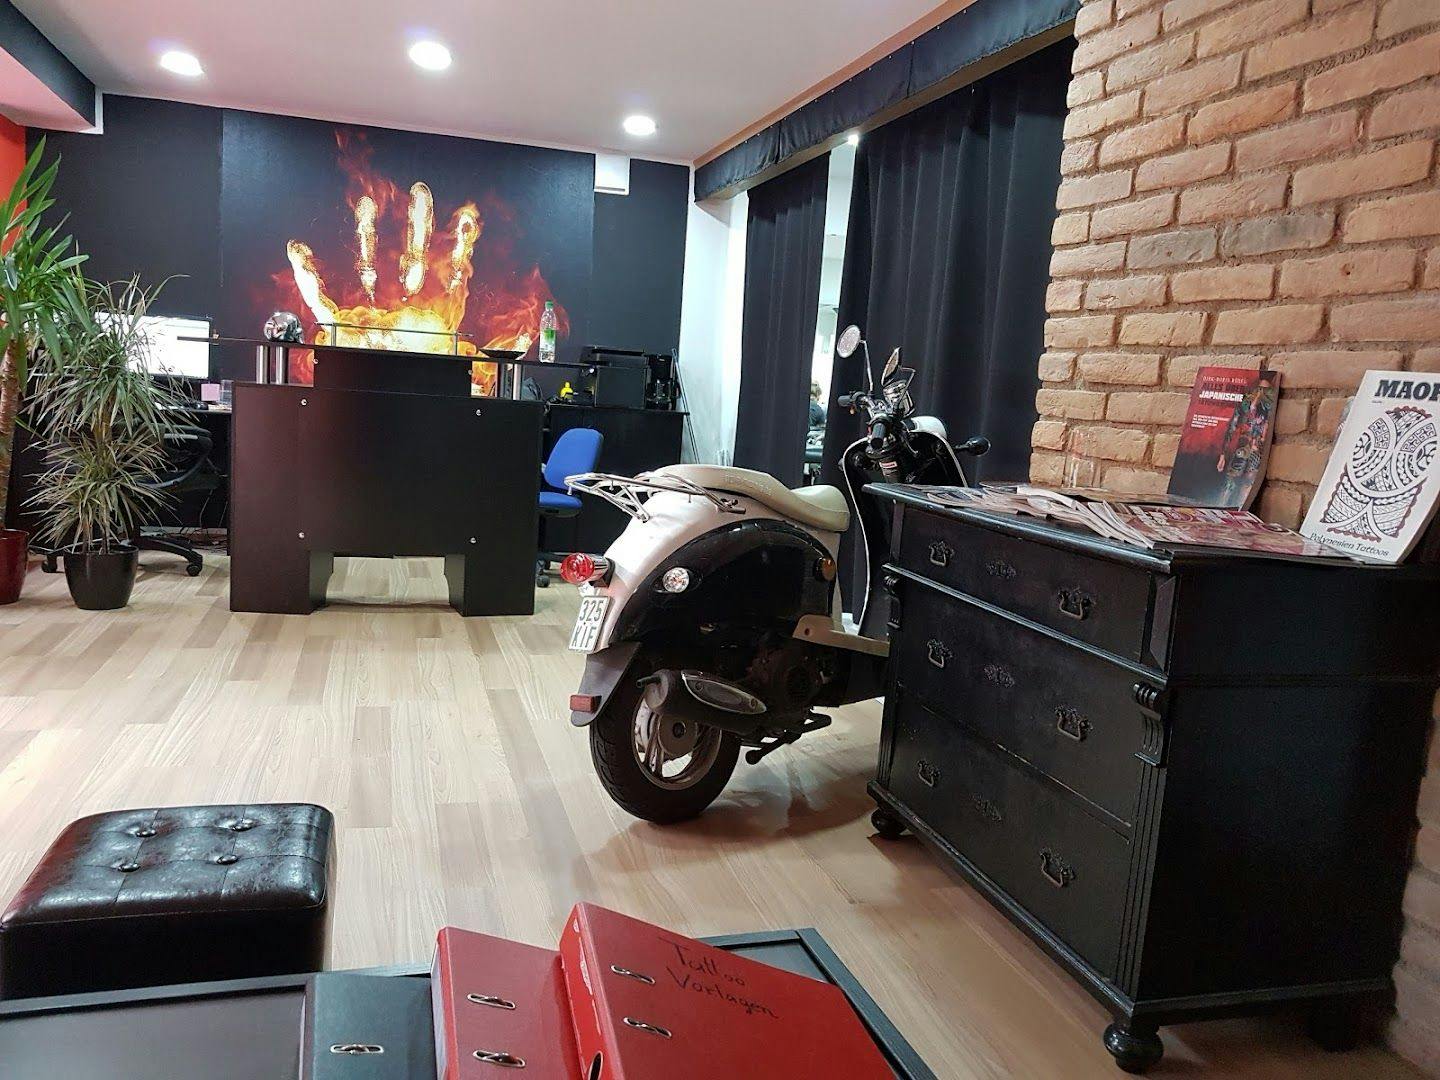 a motorcycle parked in a room with a fire in the background